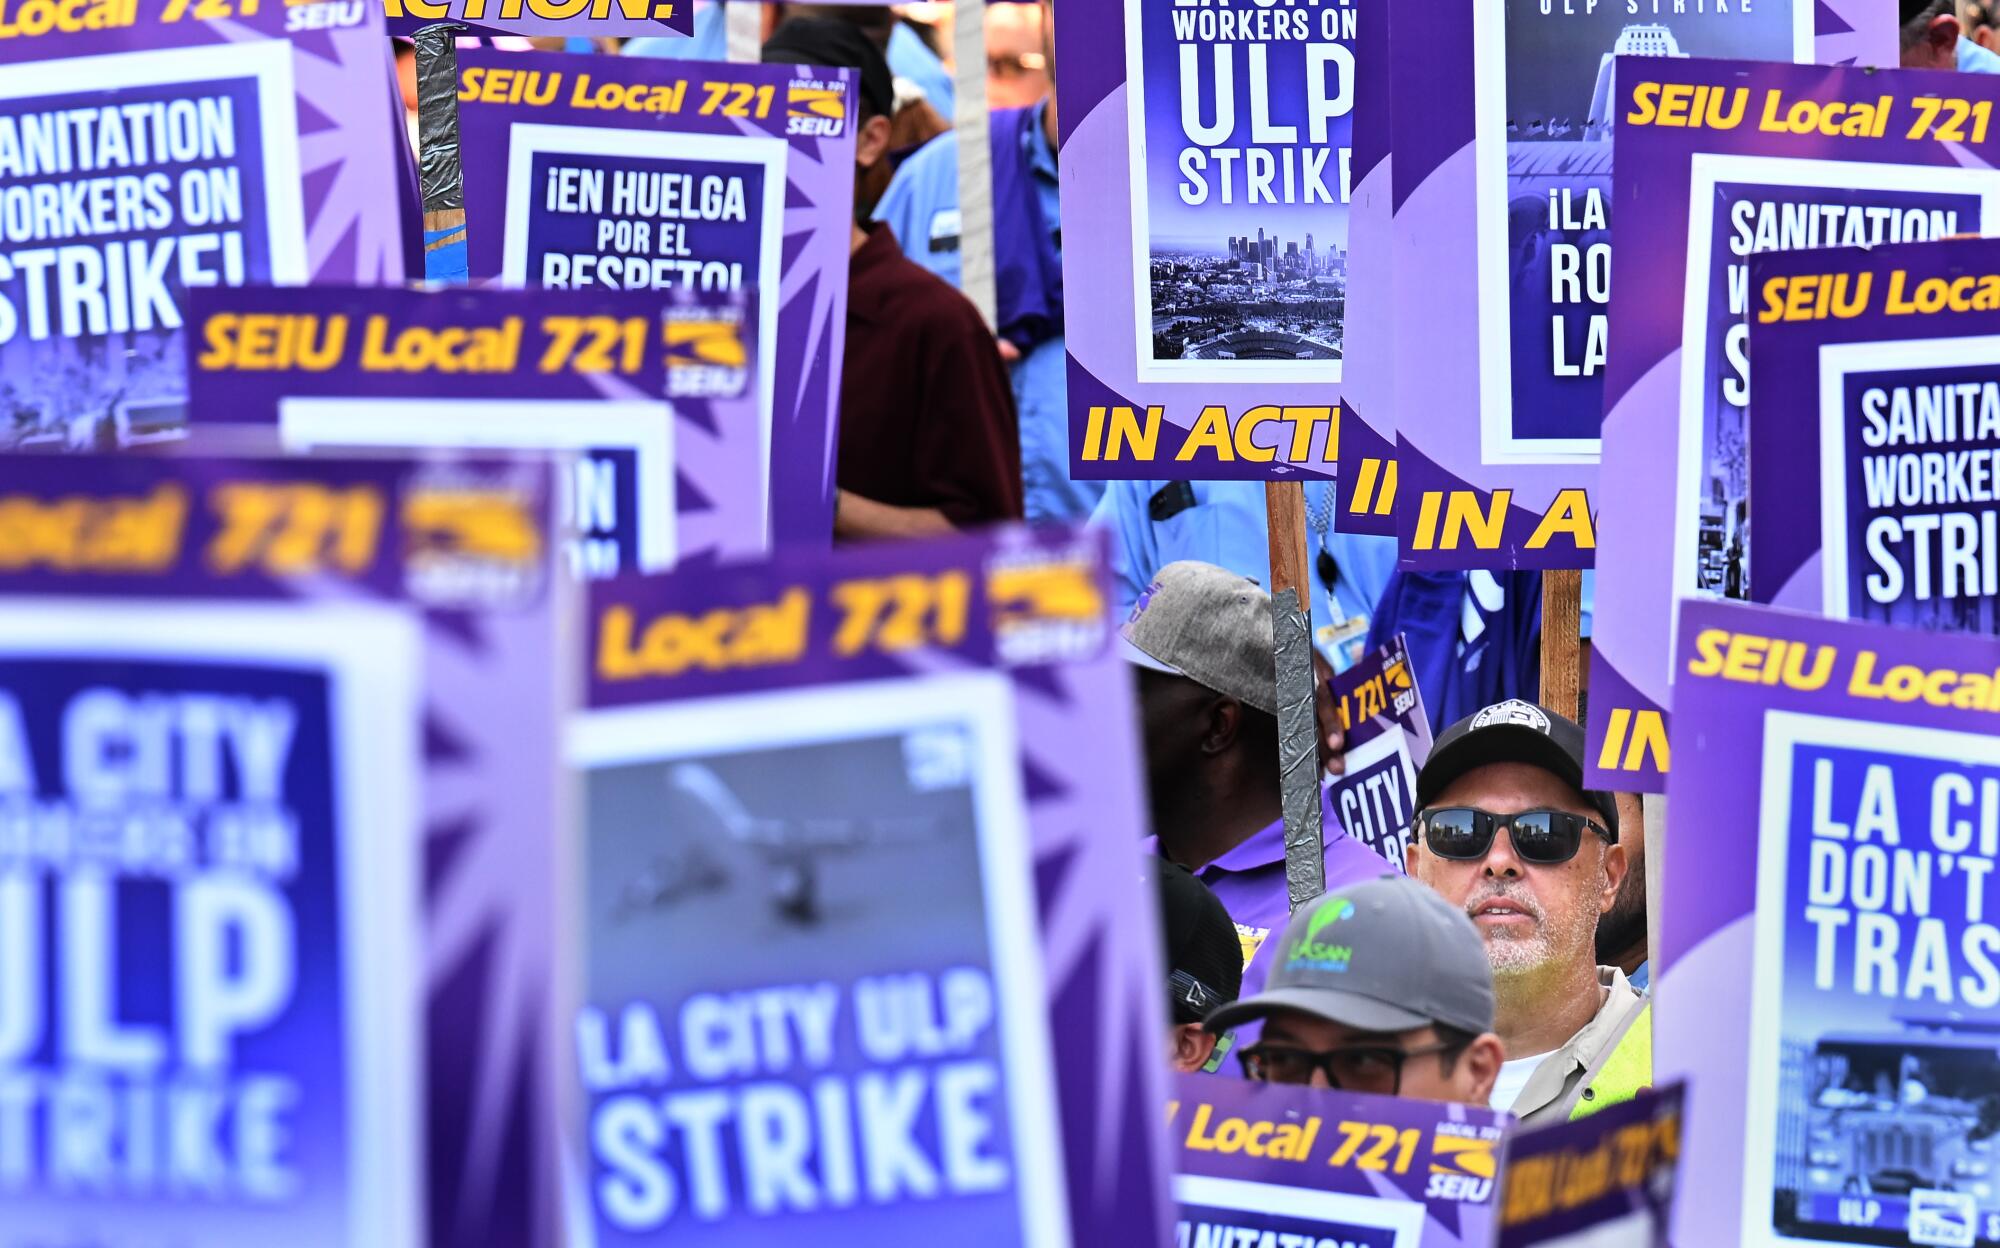 City workers began their 24-hour strike Tuesday.